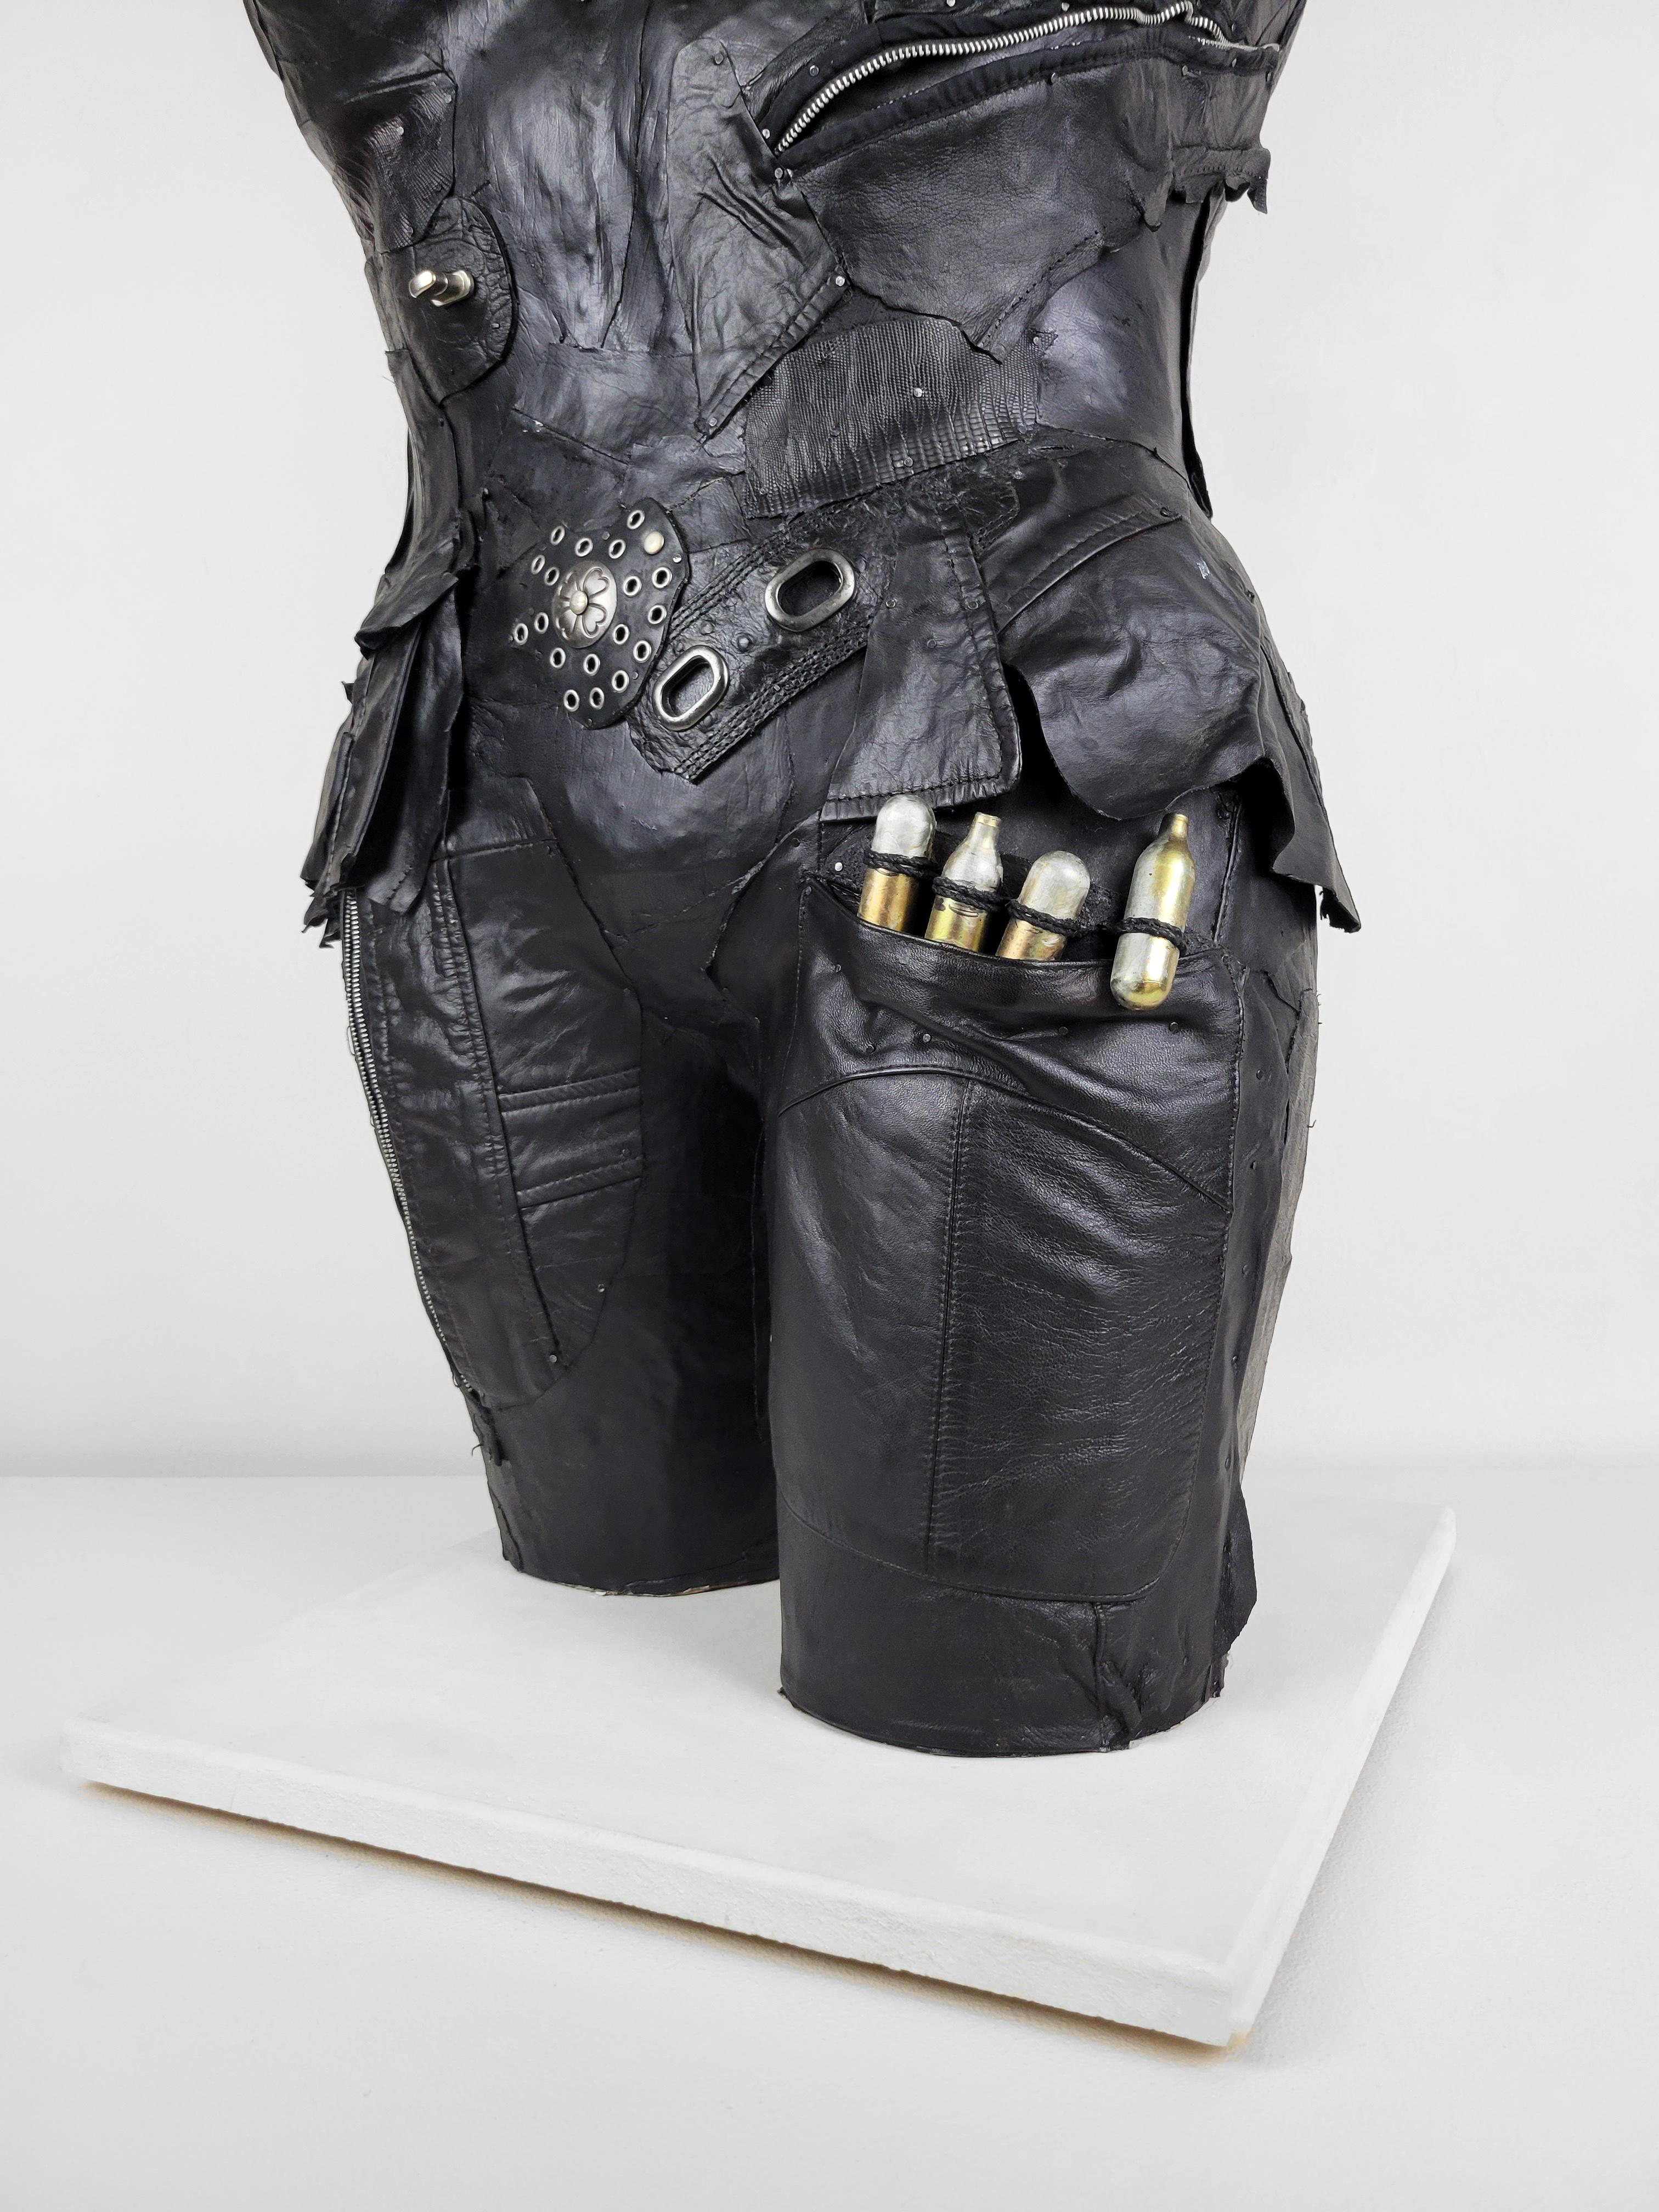 Feminist Contemporary Black/Silver Leather Metal Torso Sculpture - In Charge 694 For Sale 8